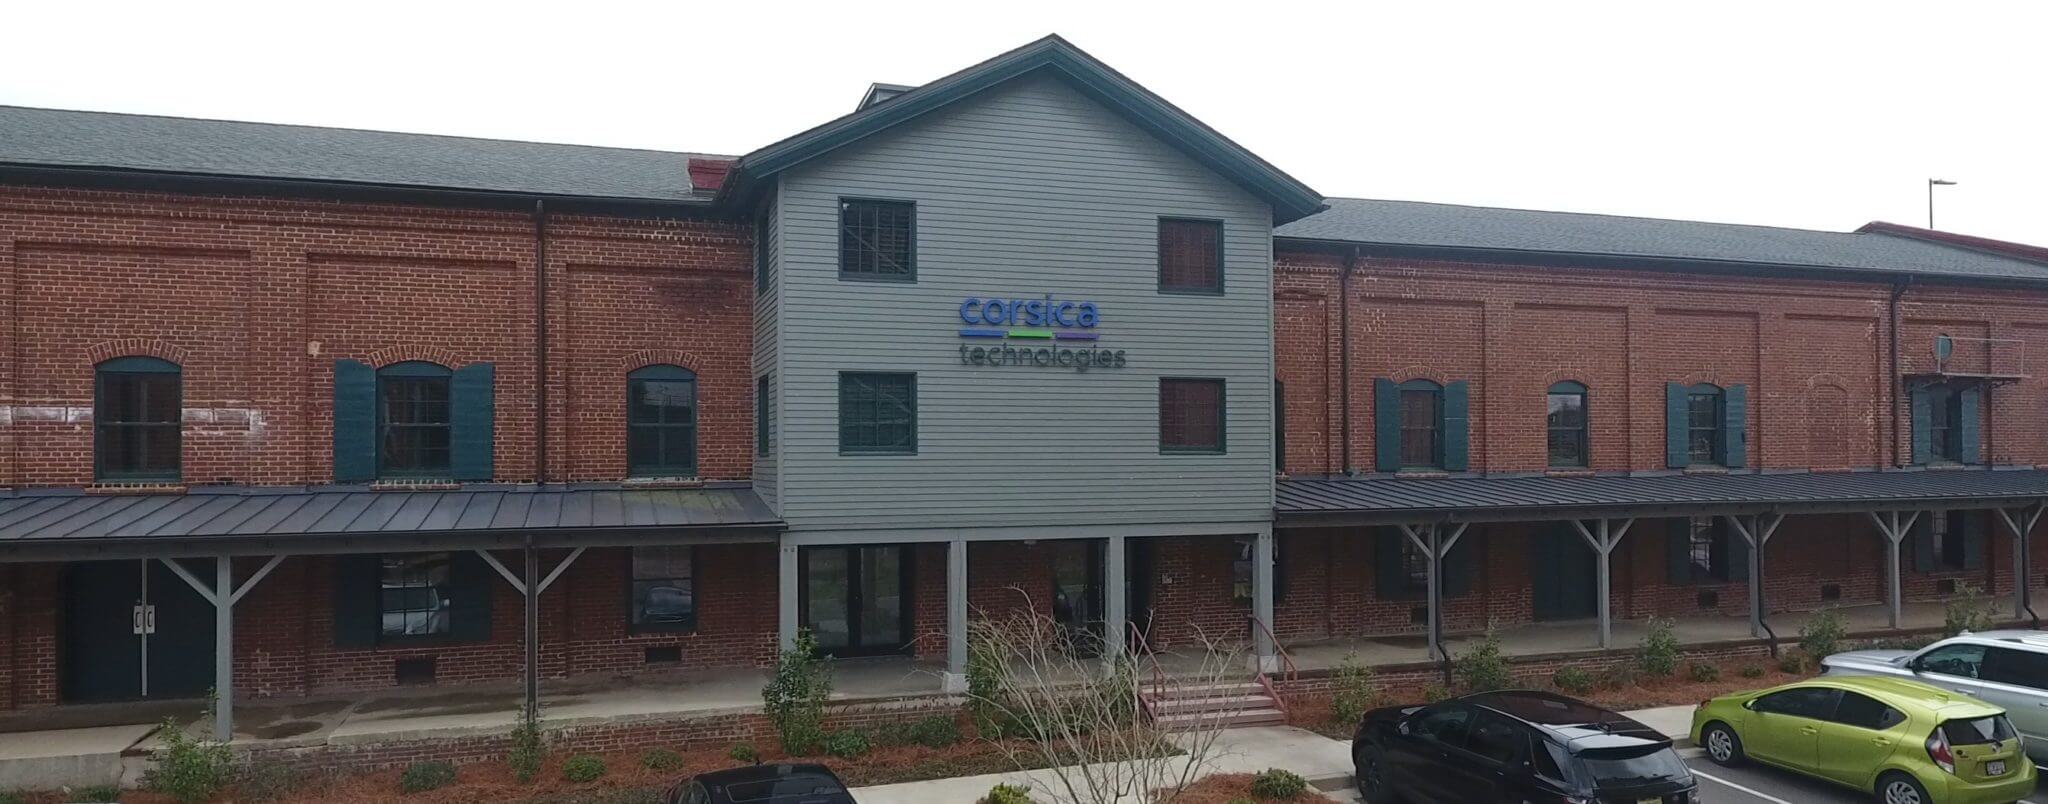 Outside view of the Corscia Technologies building.